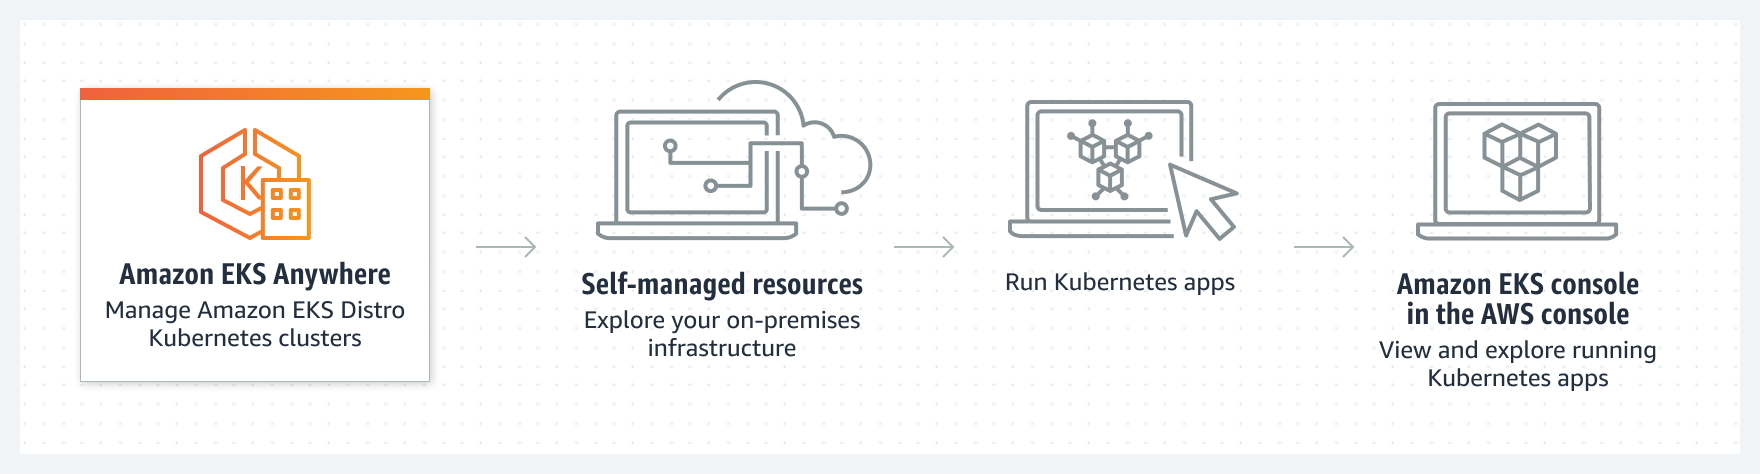 Diagram showing how you can view and explore running Kubernetes apps in the Amazon EKS console.